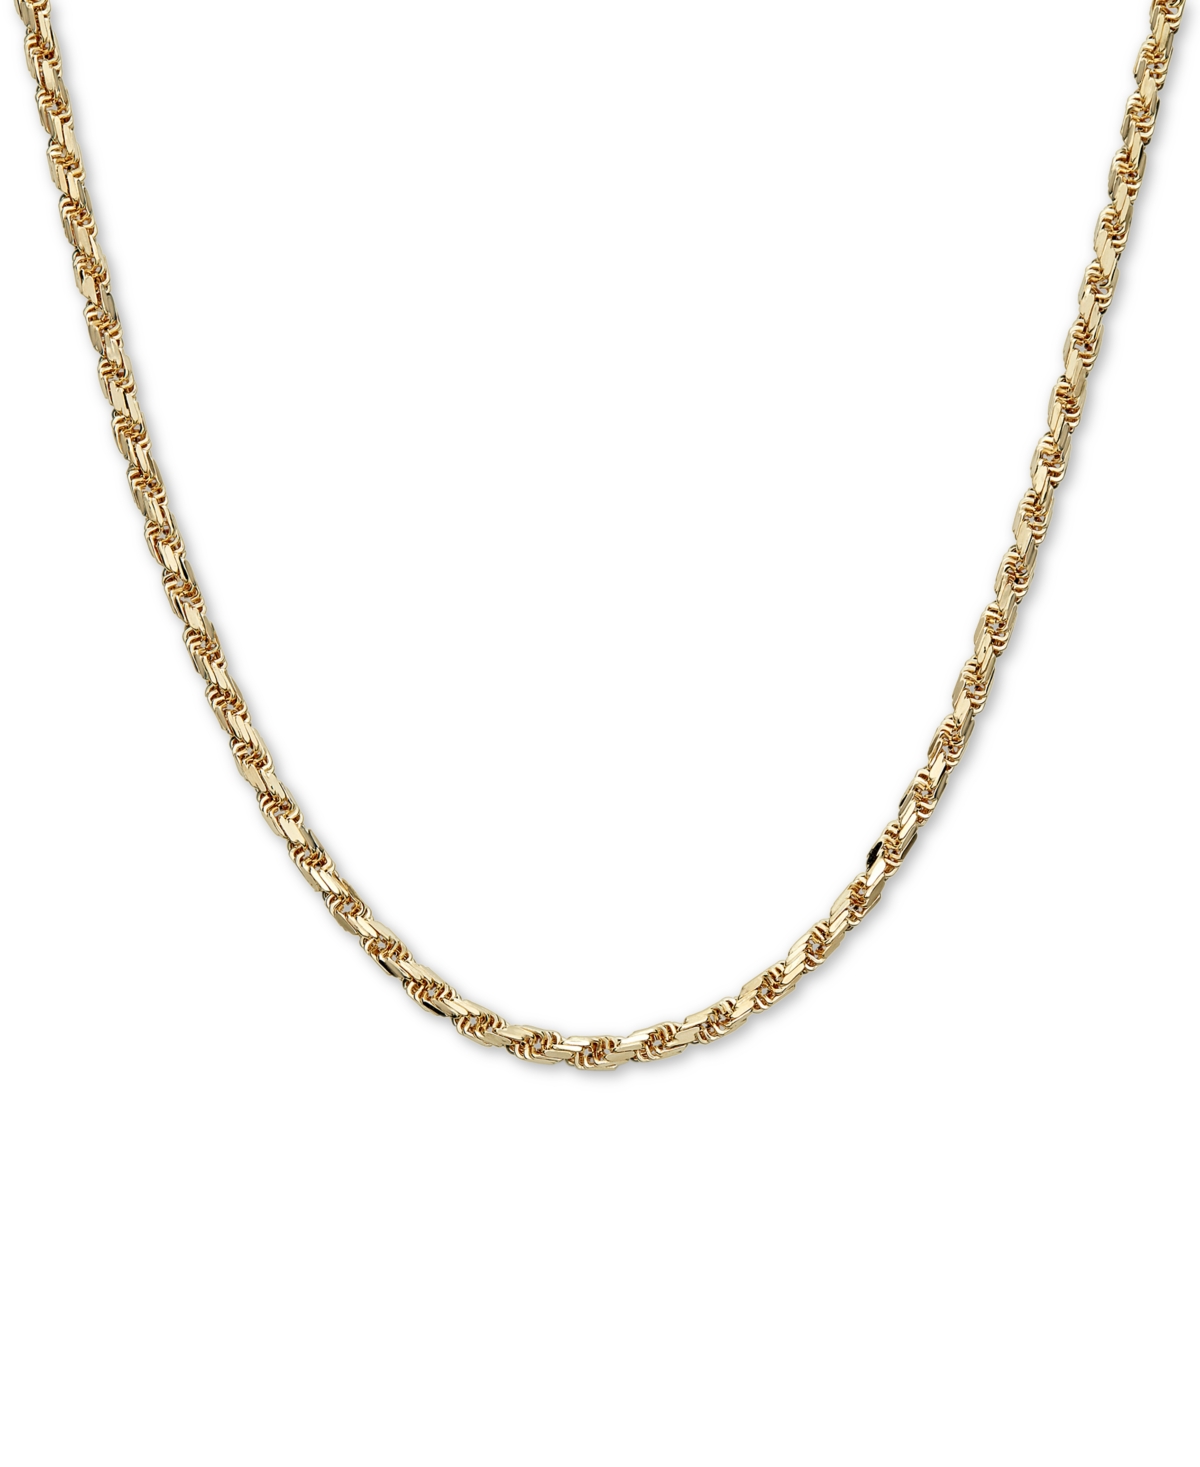 Diamond Cut Rope 22" Chain Necklace (4mm) in 14k Gold, Made in Italy - Yellow Gold